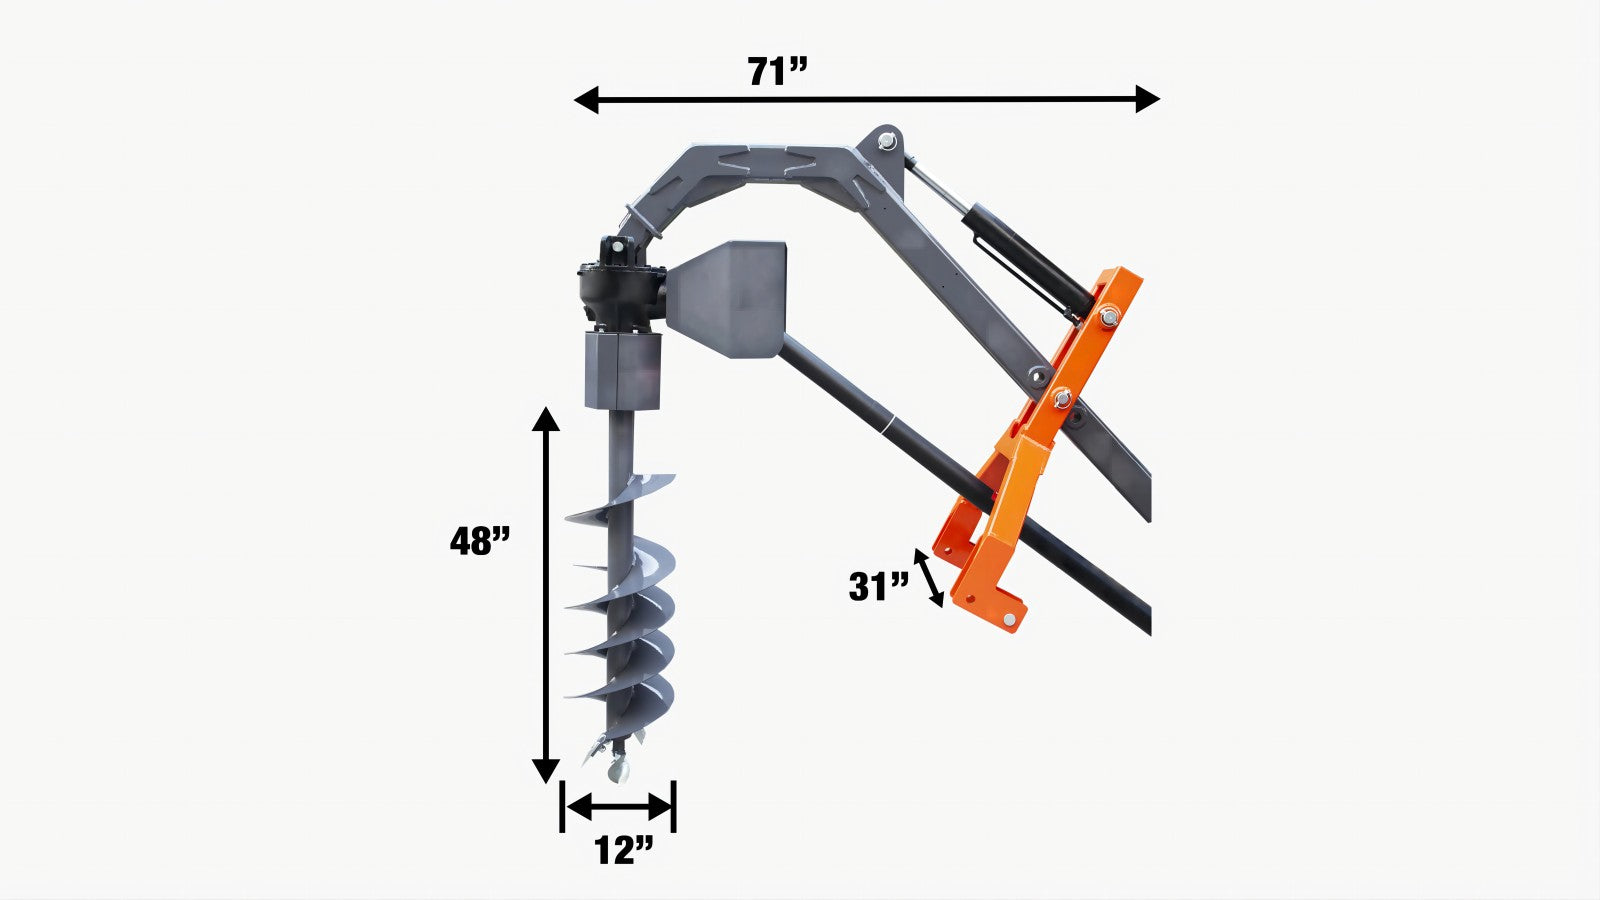 TMG Industrial 48” Hydraulic Assist Post Hole Digger, 12” Auger, Category 1 & 2, PTO Shaft Included, TMG-TPD12-specifications-image